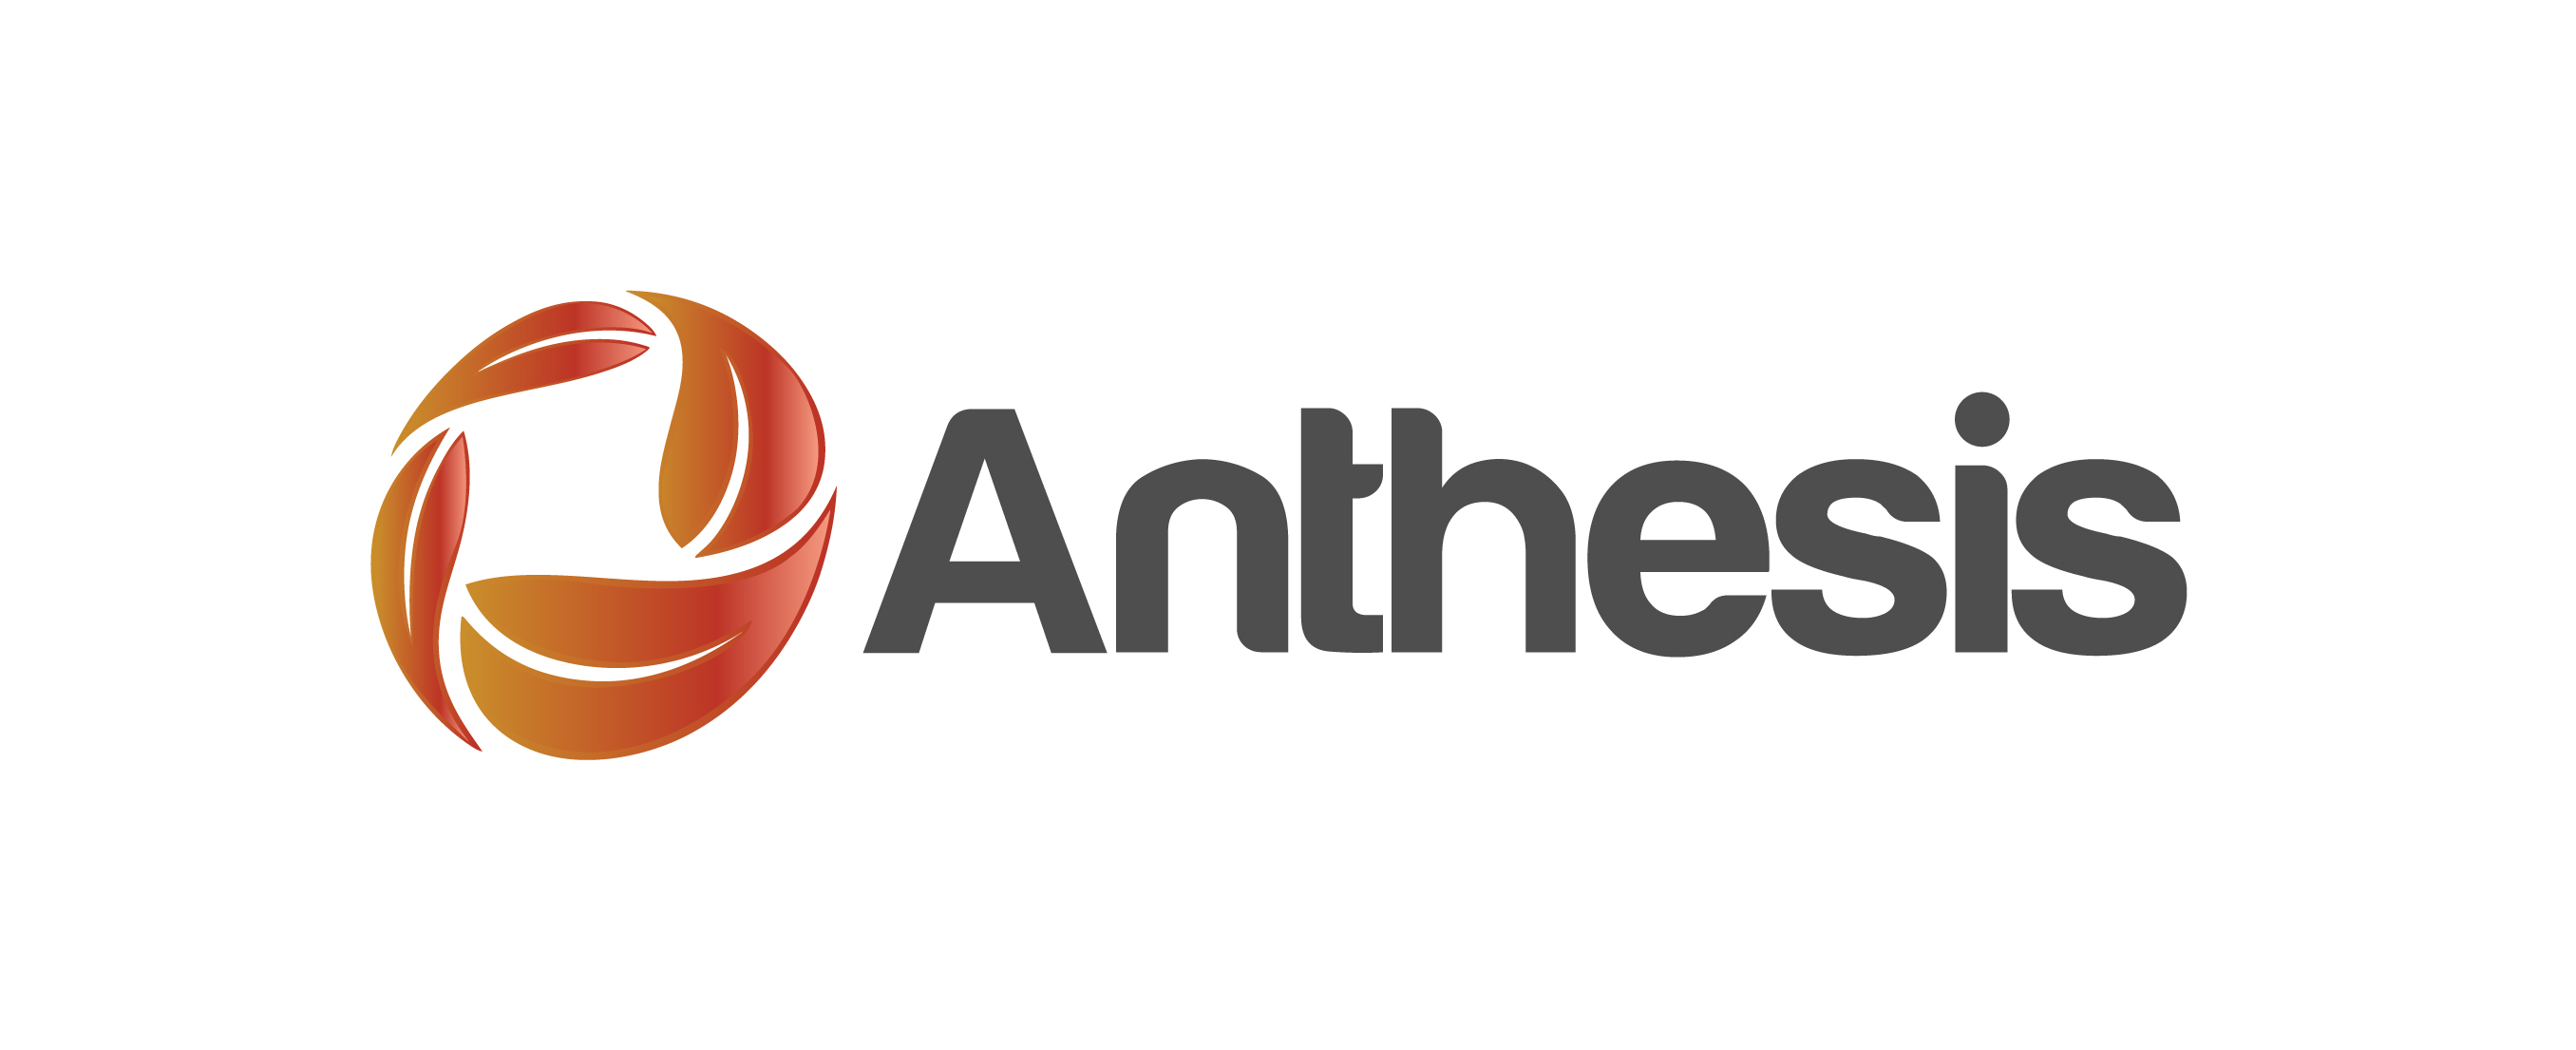 anthesis group philippines